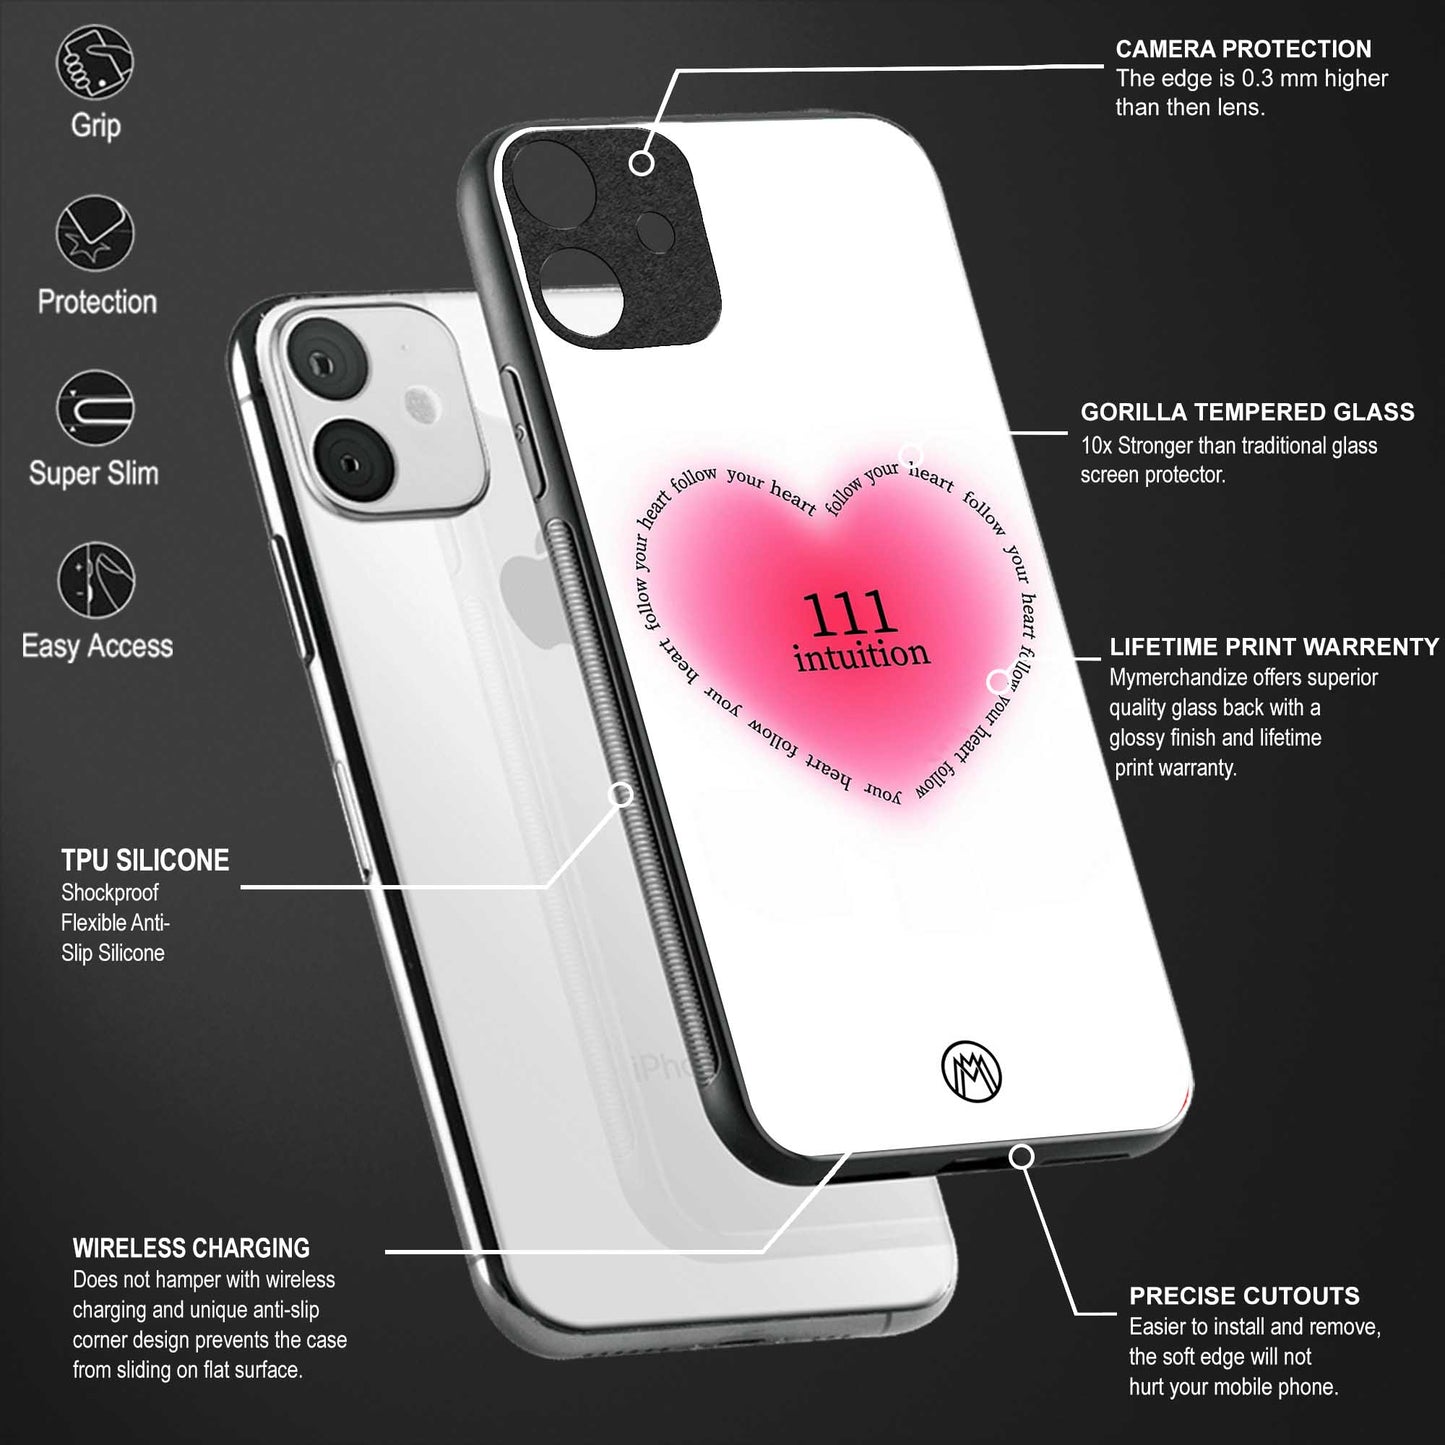 111 intuition glass case for phone case | glass case for samsung galaxy s23